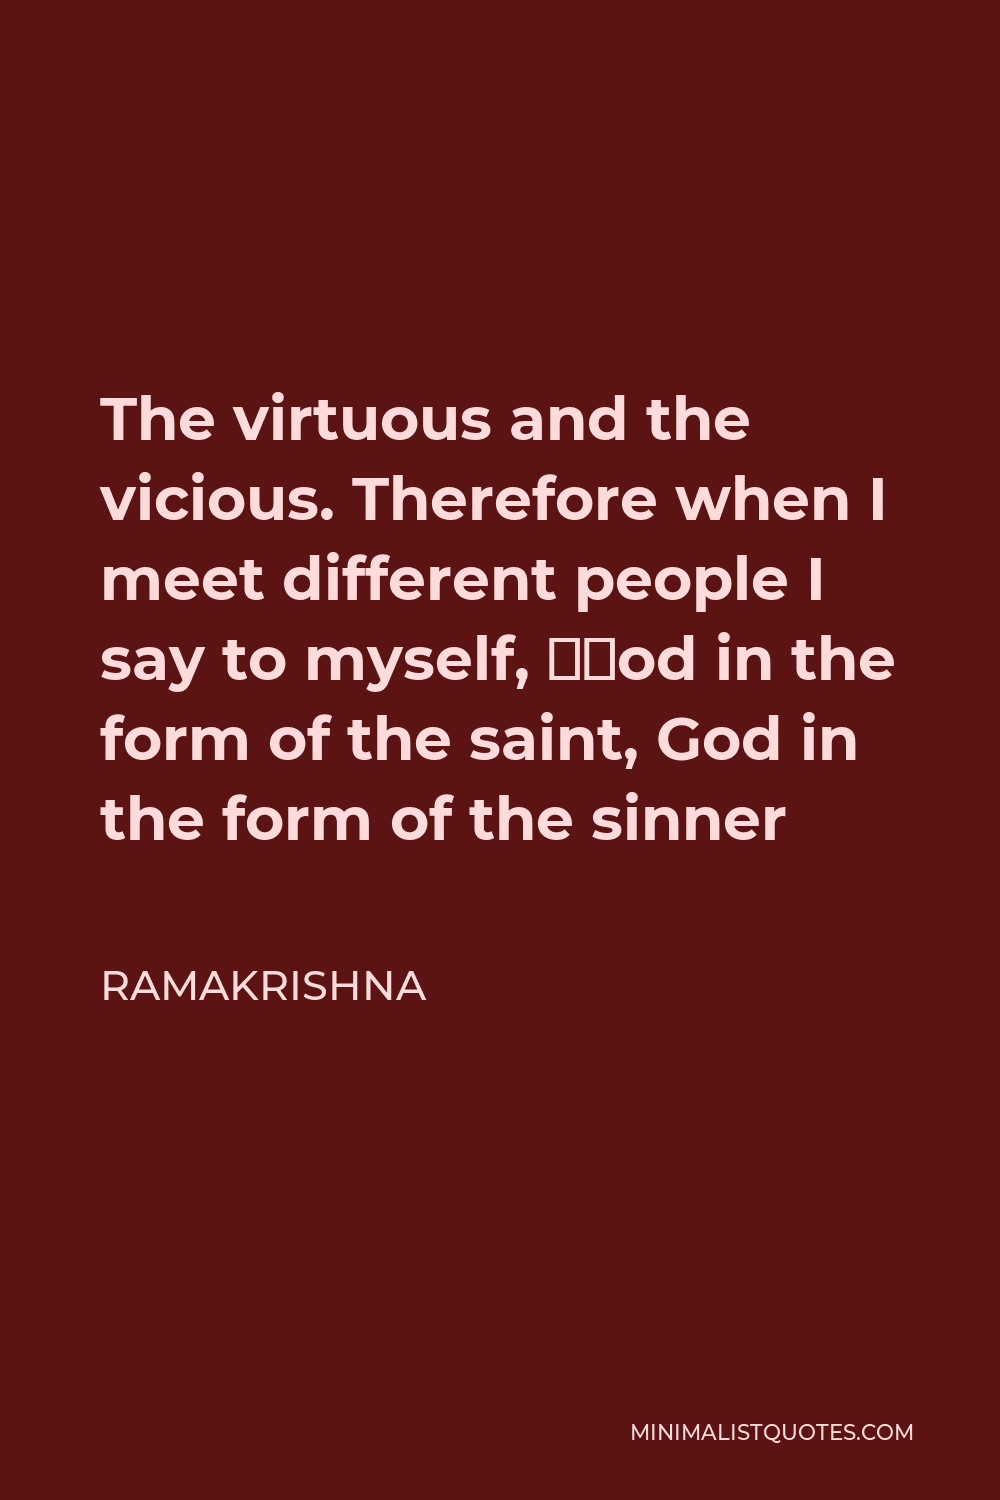 Ramakrishna Quote - The virtuous and the vicious. Therefore when I meet different people I say to myself, “God in the form of the saint, God in the form of the sinner